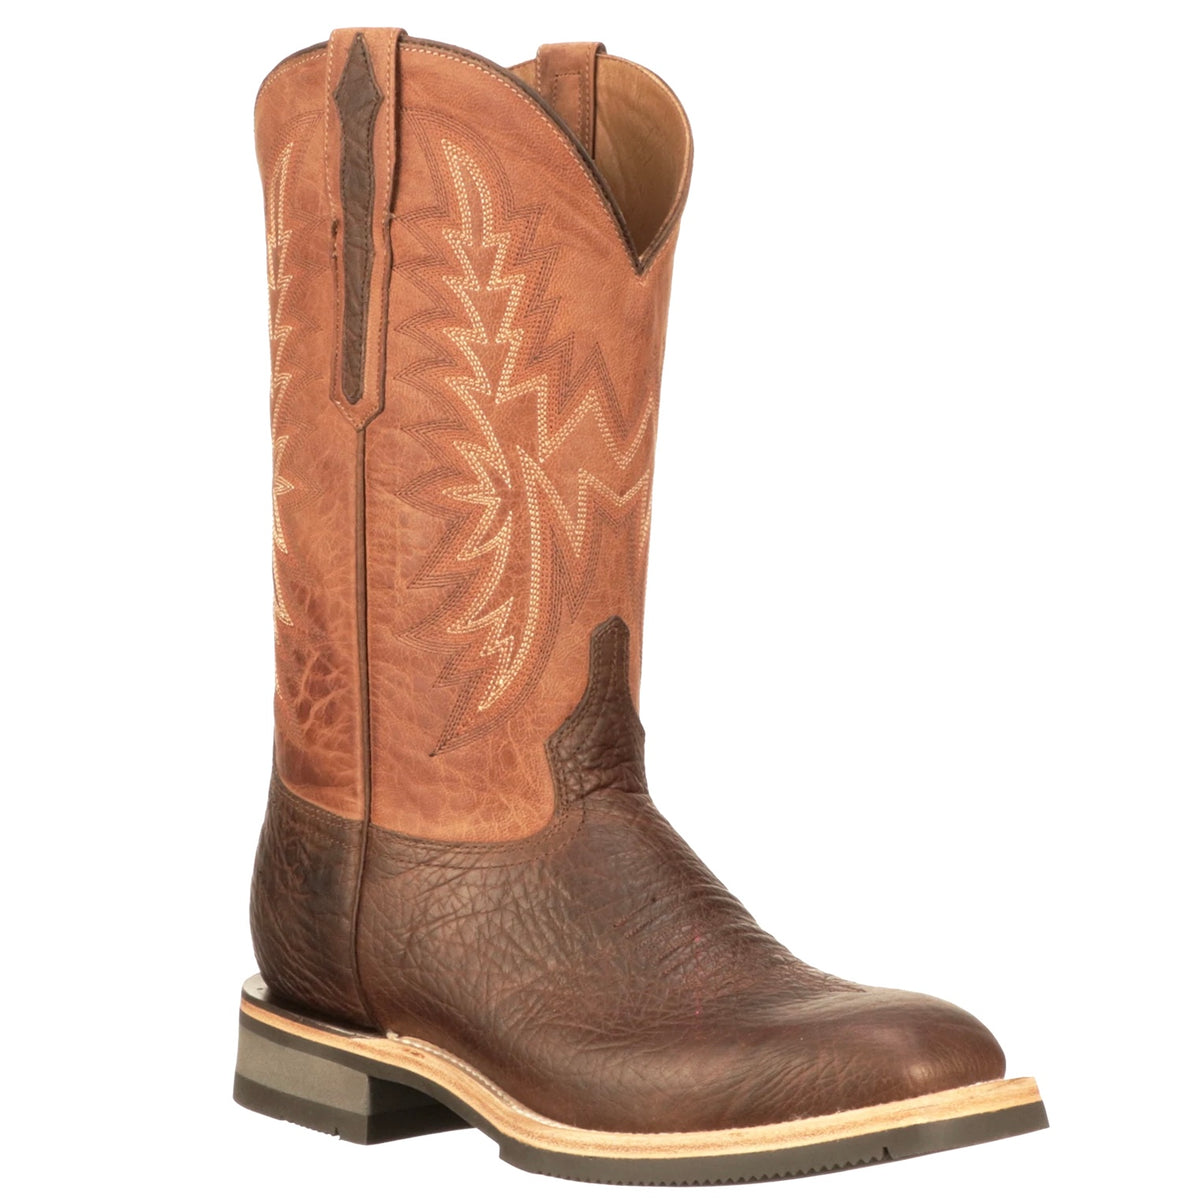 MEN’S LUCCHESE RUDY - CHOCOLATE COWHIDE BOOTS